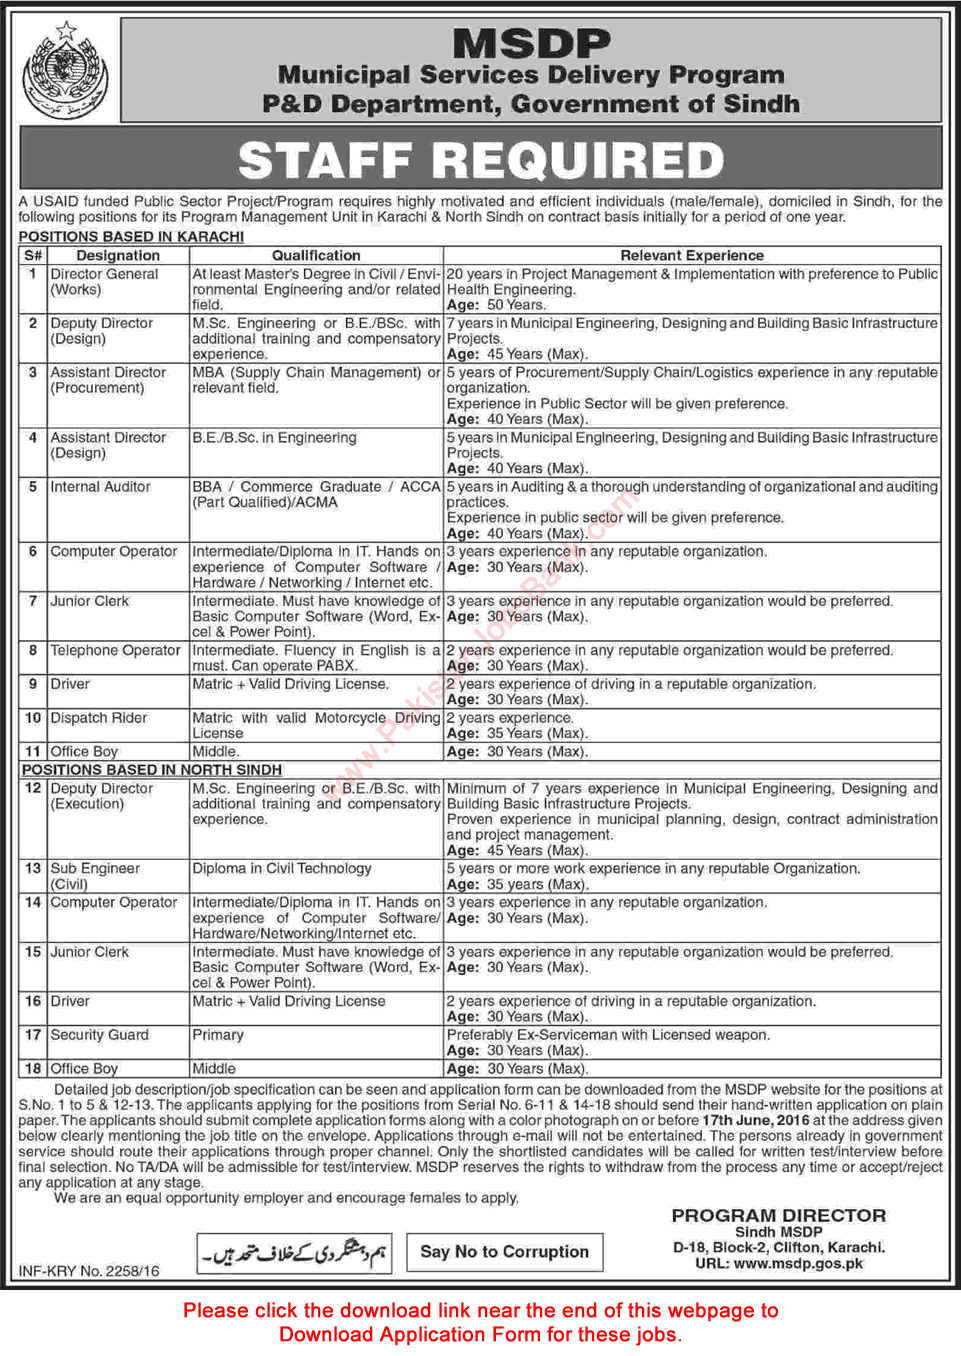 Municipal Services Delivery Program Sindh Jobs 2016 May USAID MSDP Application Form Download Latest